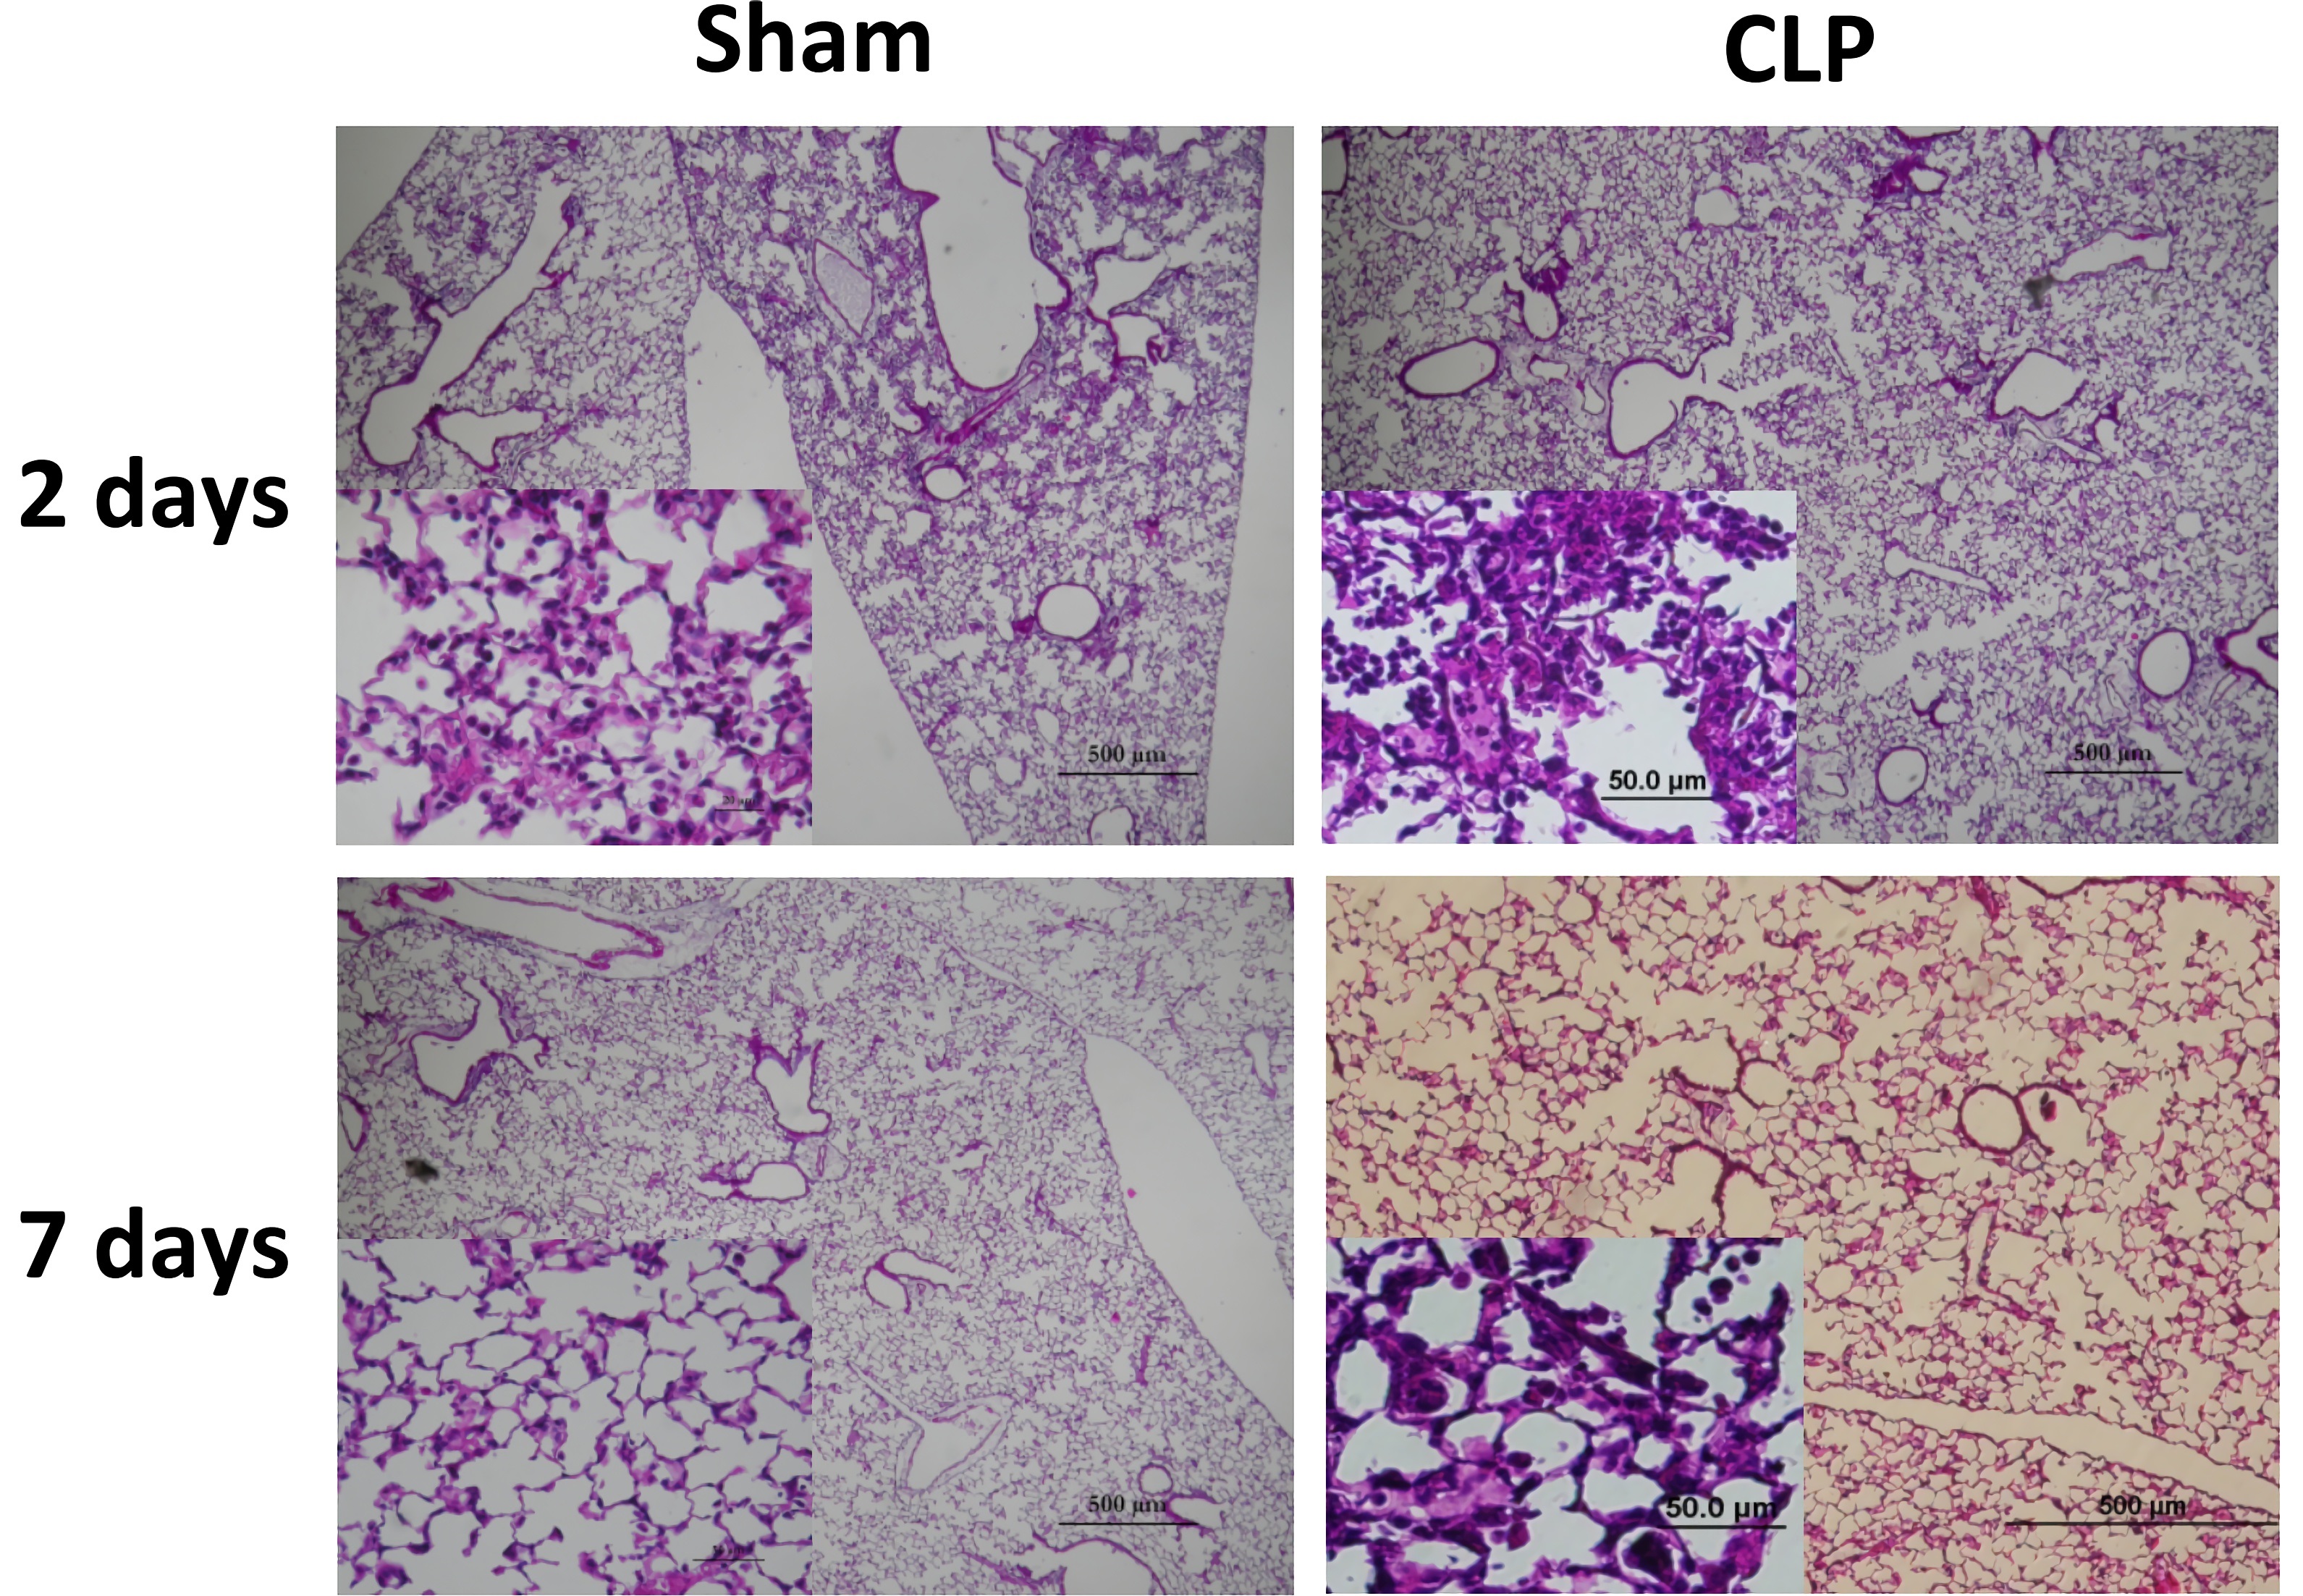 Fig. 1 Lung histology of sham and CLP groups two days after Pseudomonas administration. (Restagno et al. 2016)